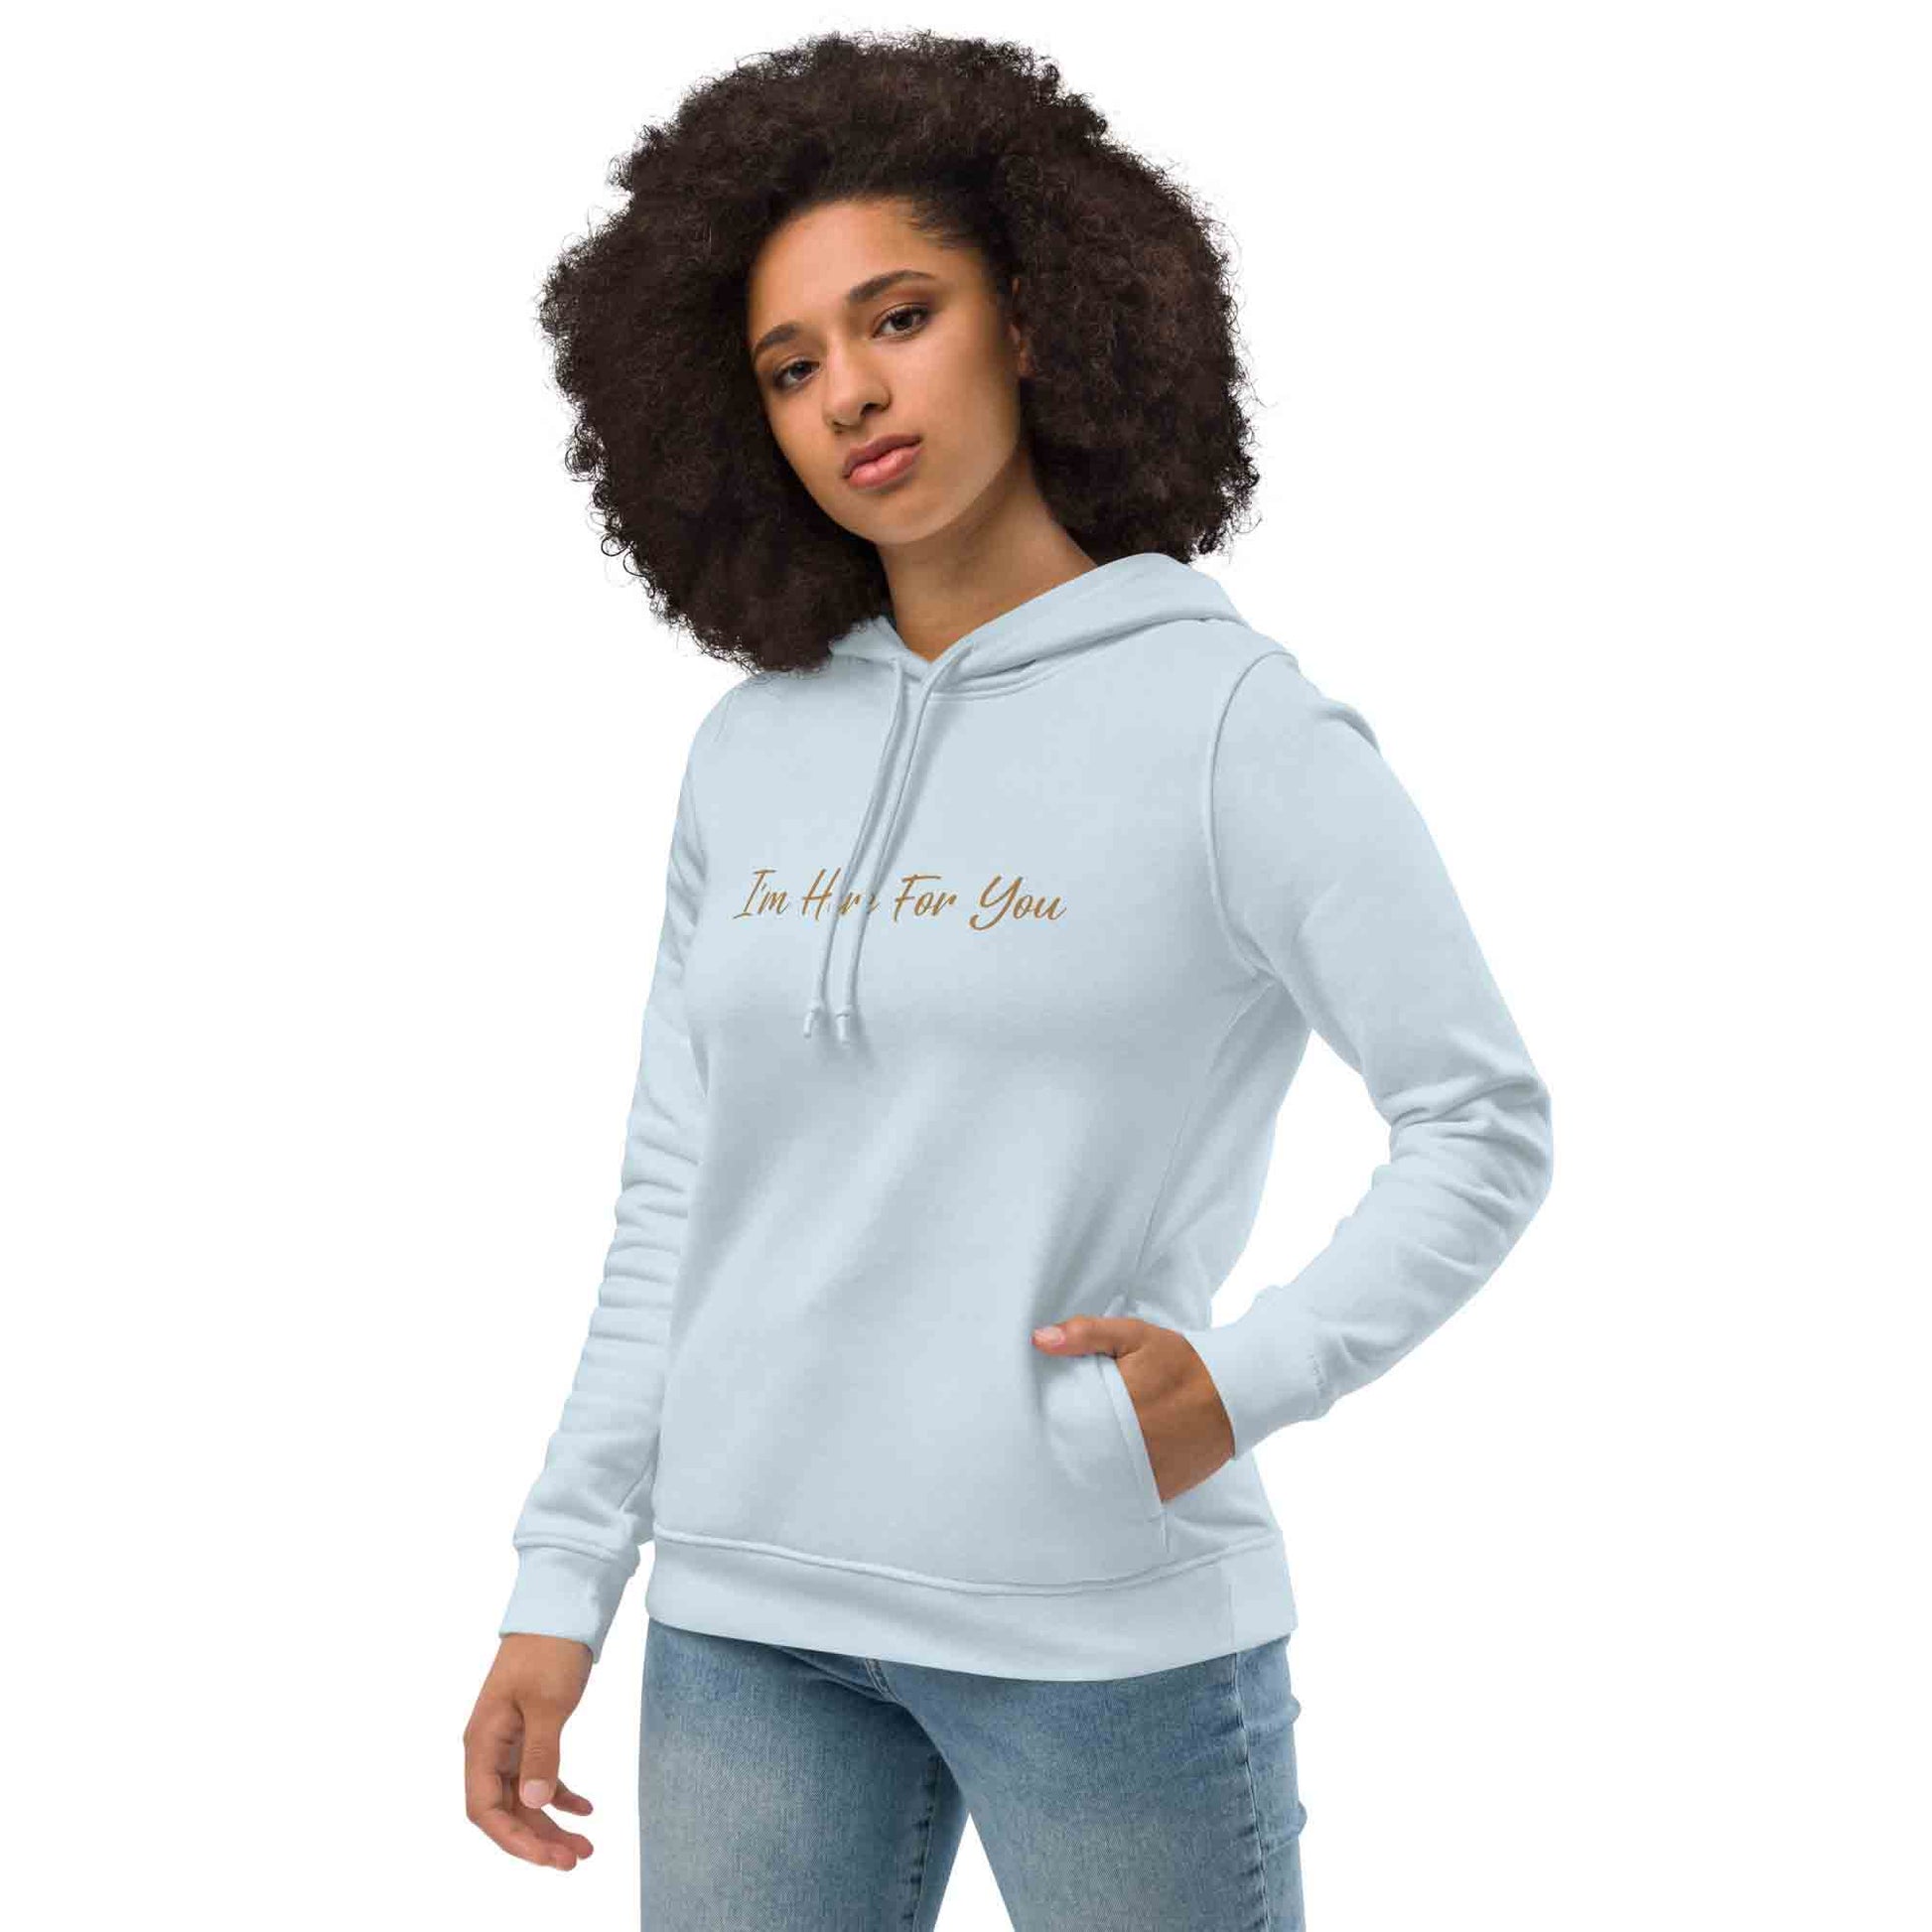 Women blue motivational hoodie with inspirational quote, "I'm Here For You."